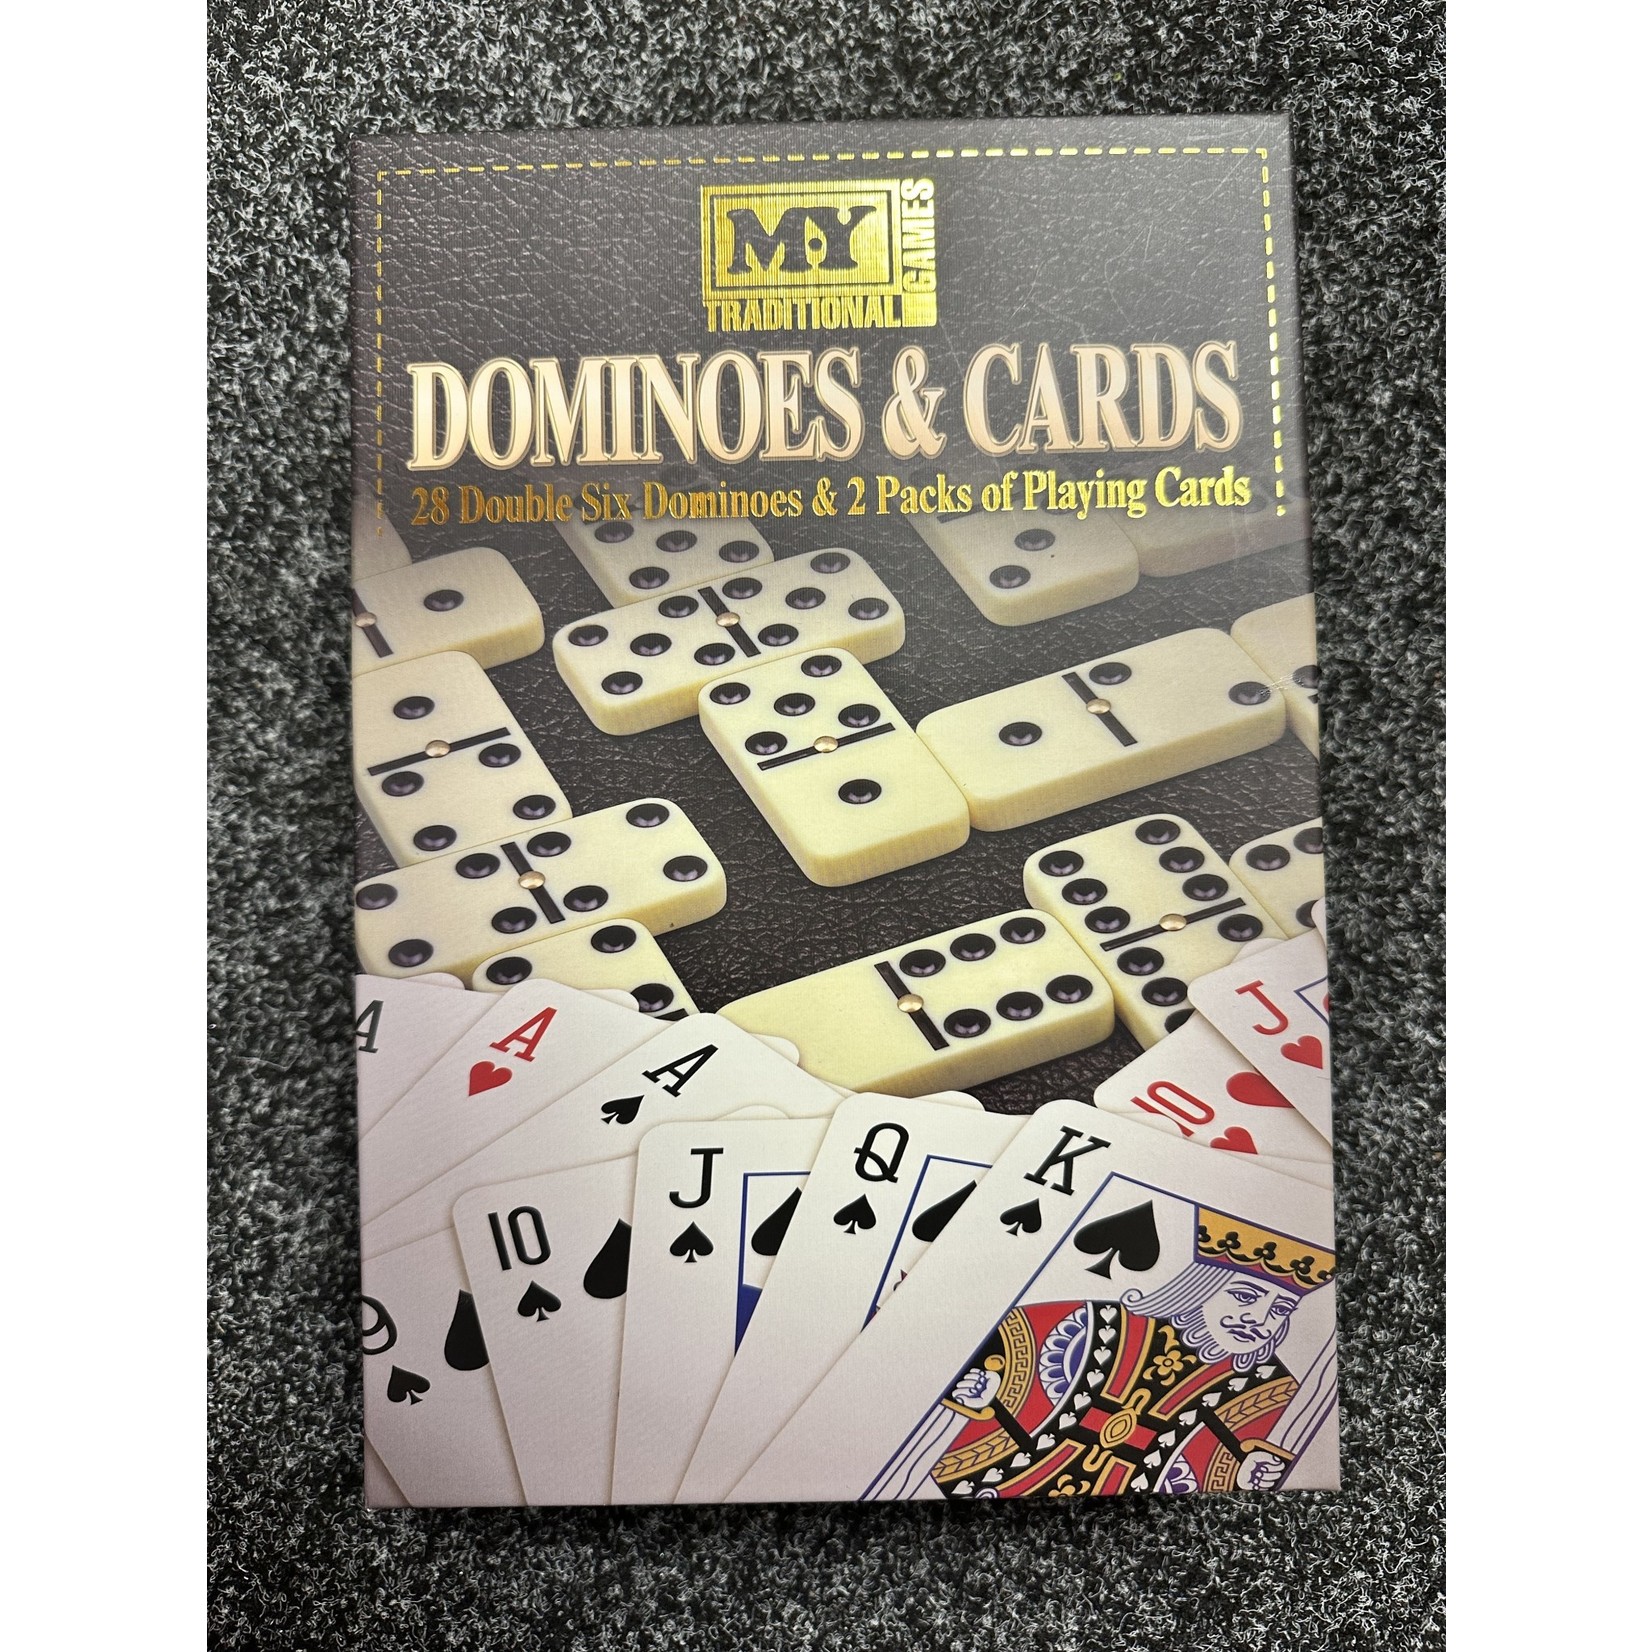 28pc Double Six Dominoes & 2 Packs Playing Cards